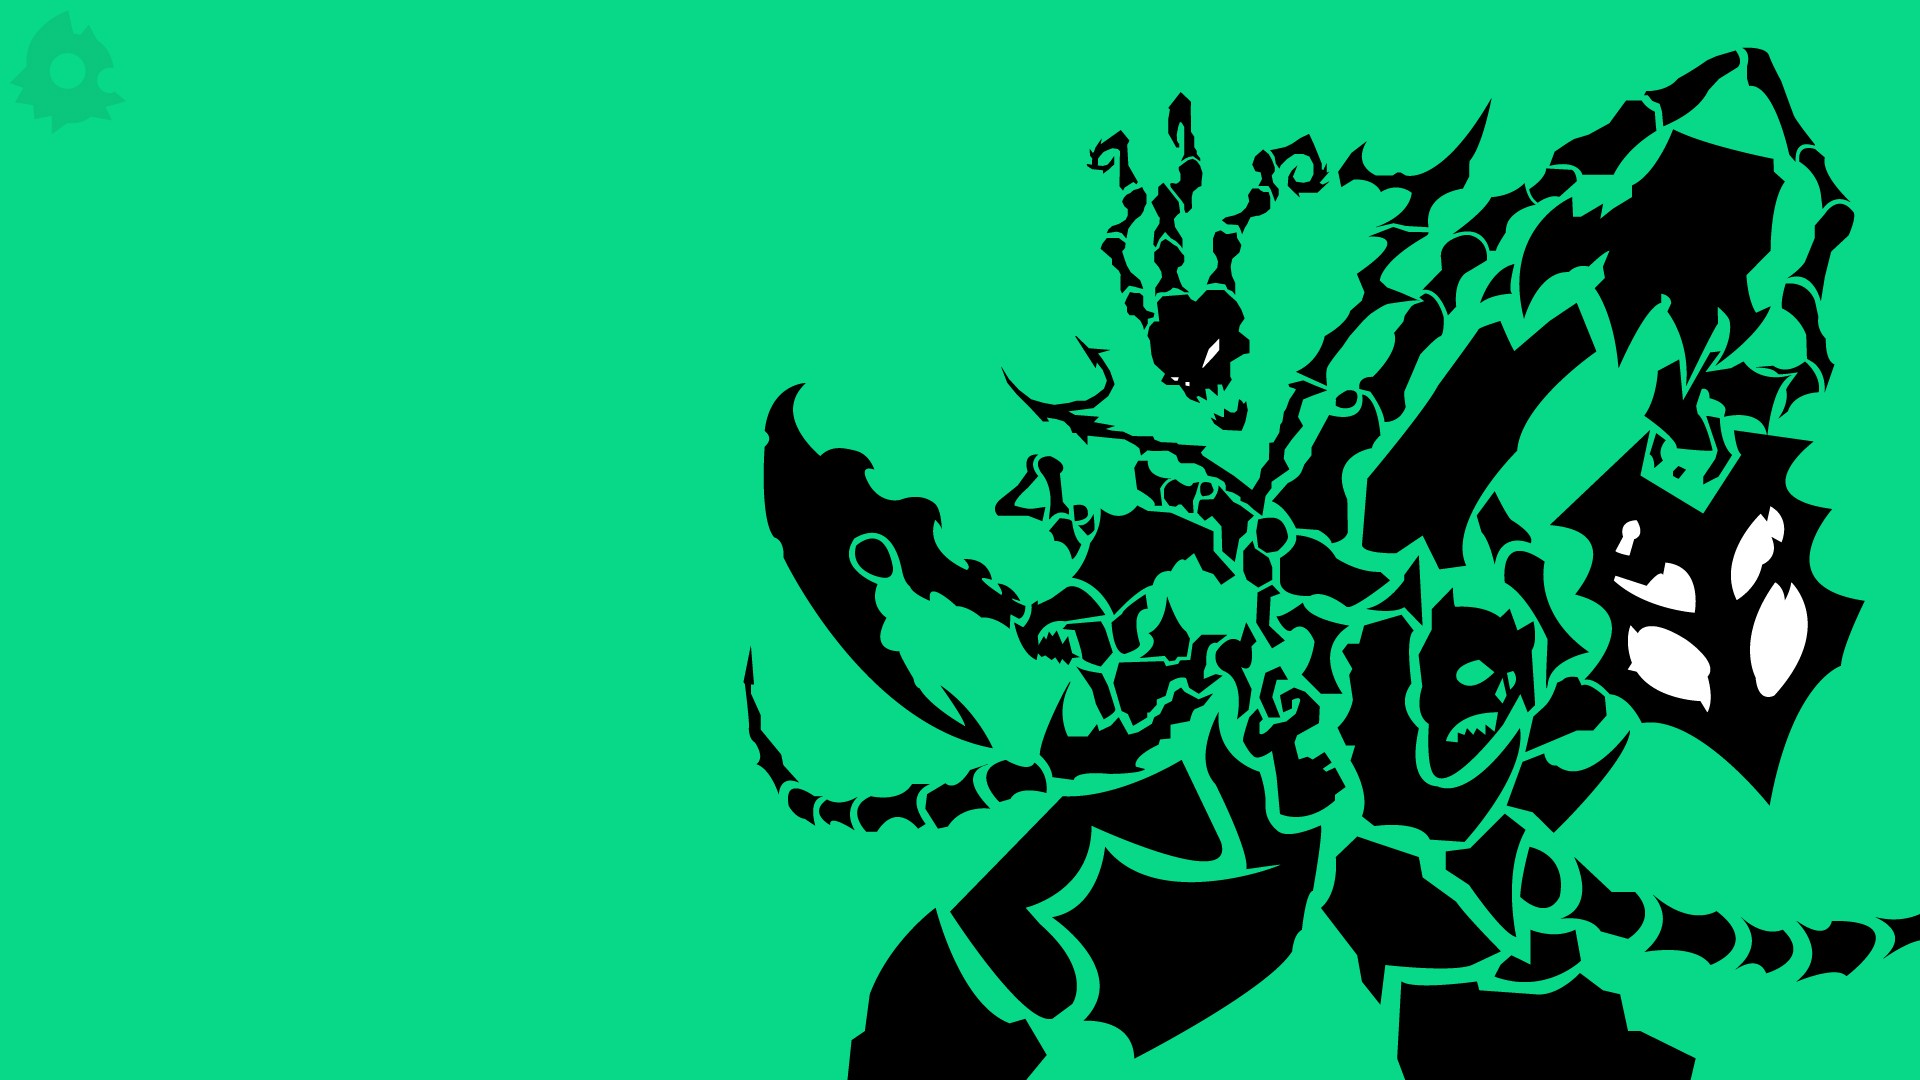 League Of Legends Thresh Green Background Simple Background Skull PC Gaming 1920x1080